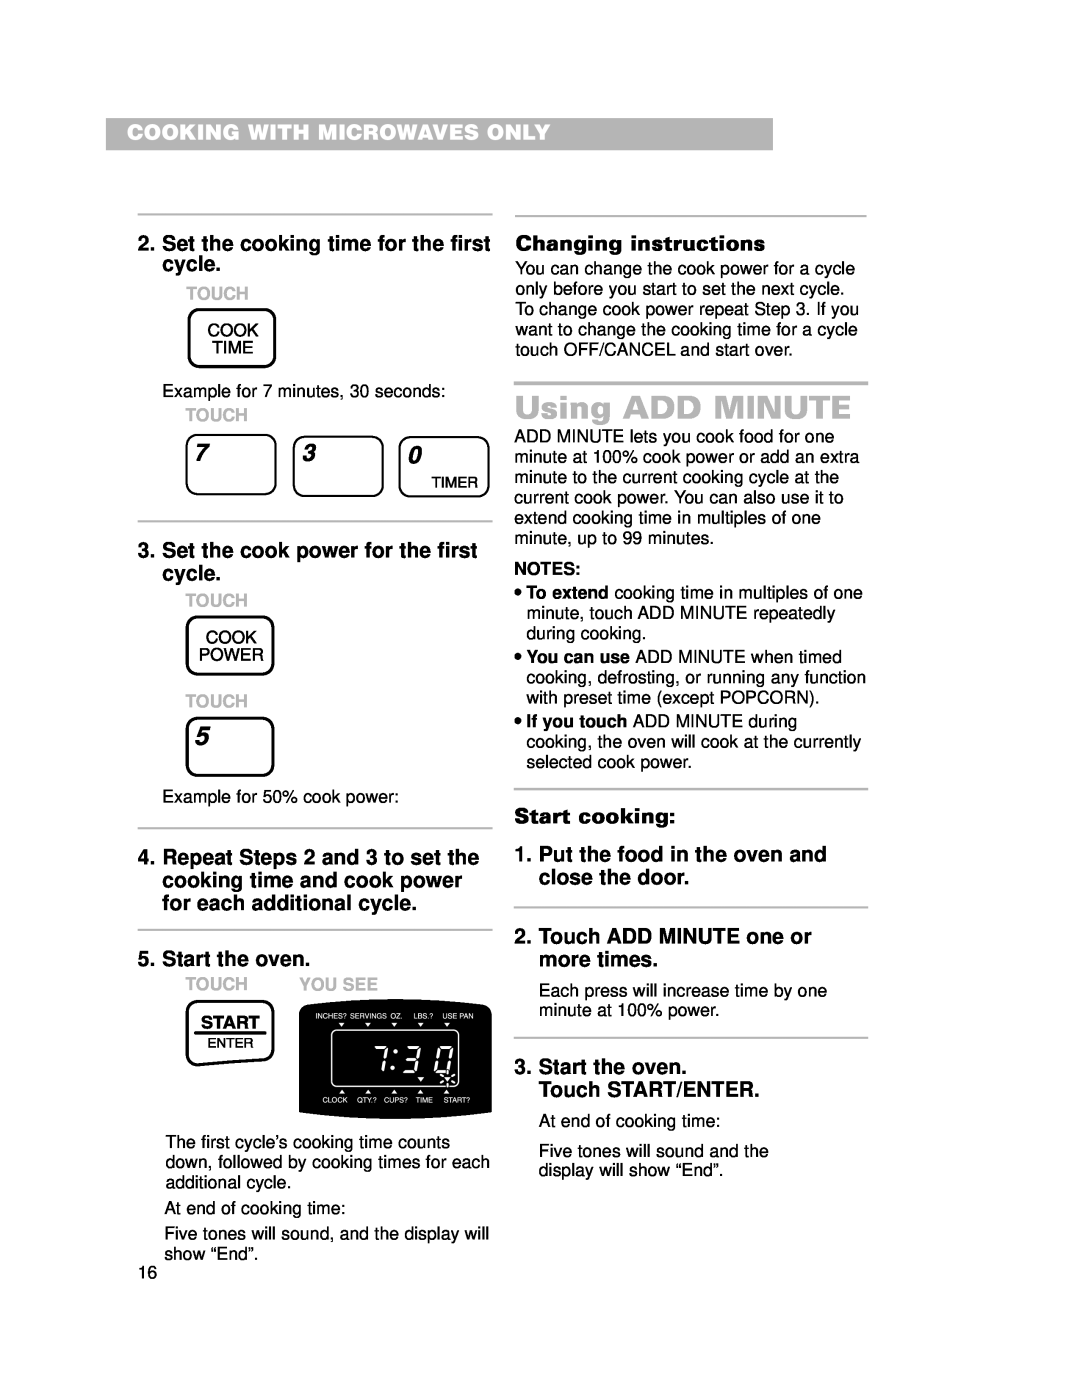 Whirlpool CMT102SG Using ADD MINUTE, Set the cooking time for the first cycle, Changing instructions, Start the oven 